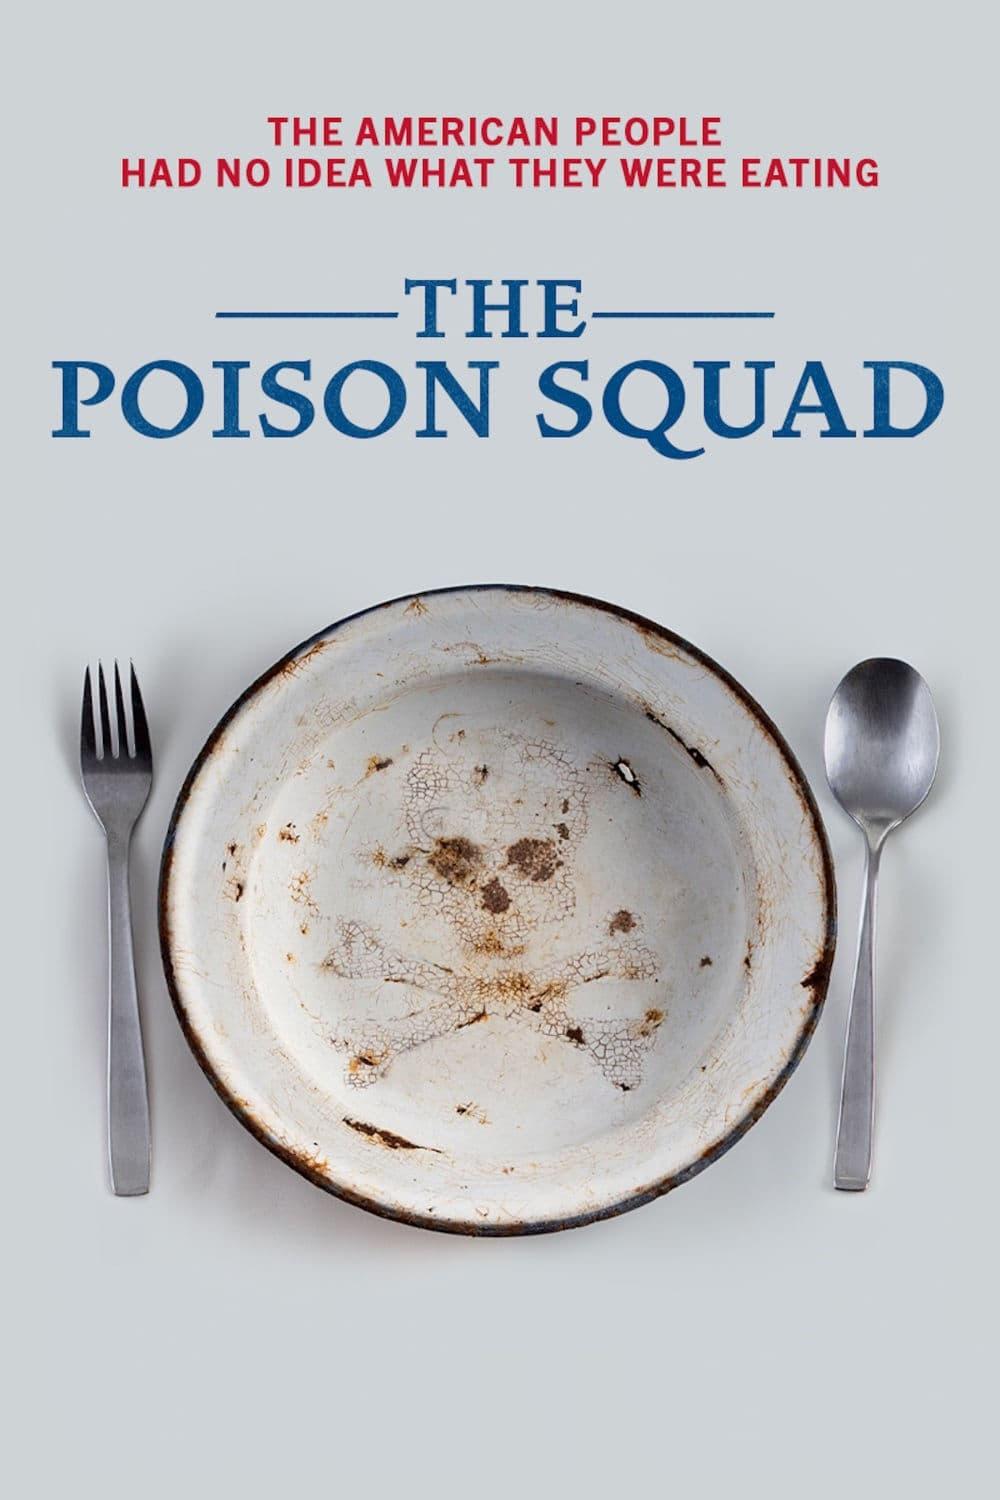 The Poison Squad poster